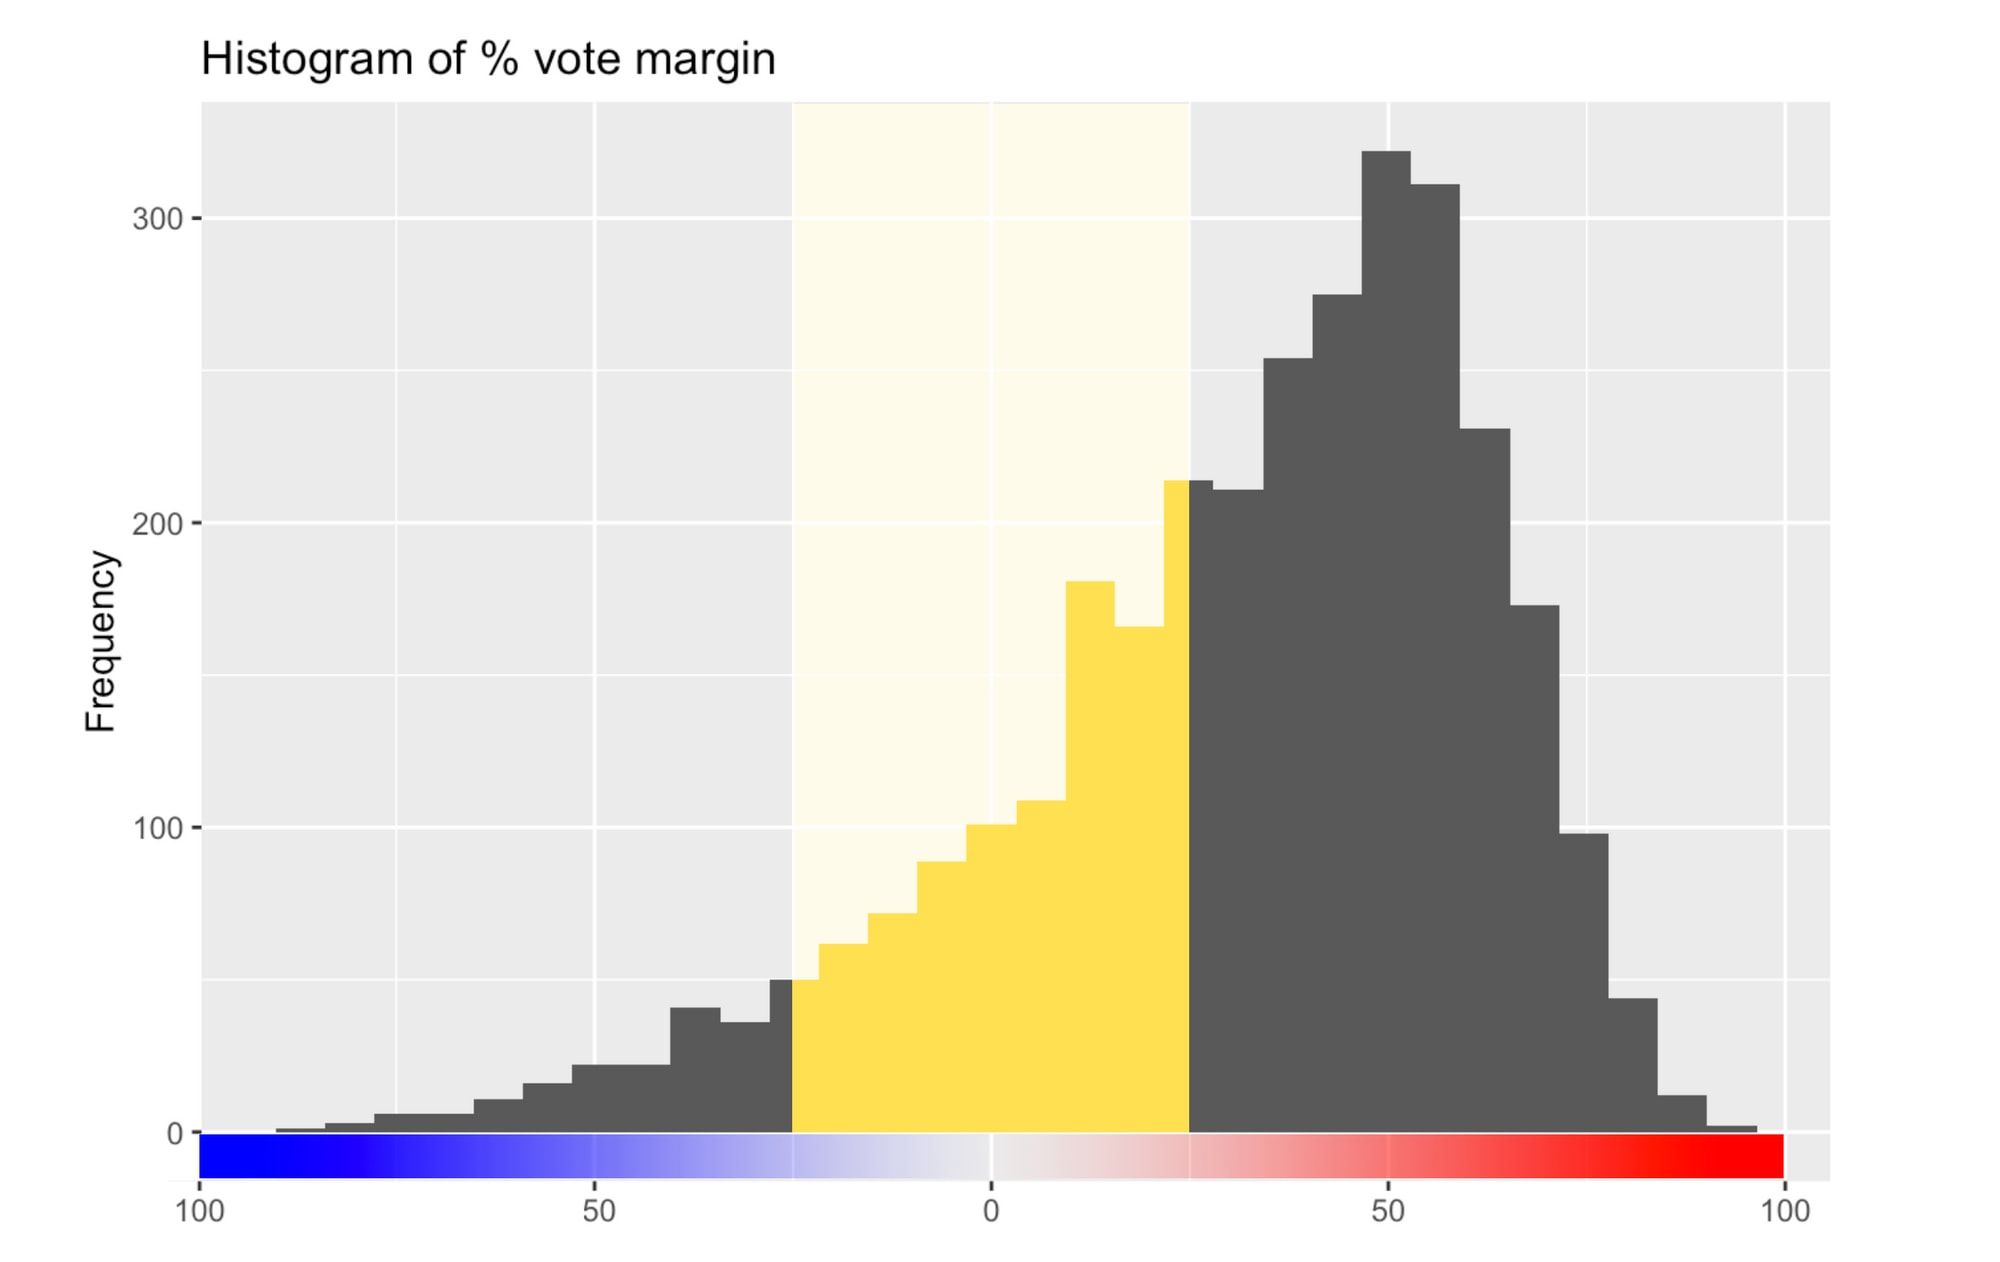 We see a histogram of percent vote margin, and the frequency distribution skews to the left (democrat)